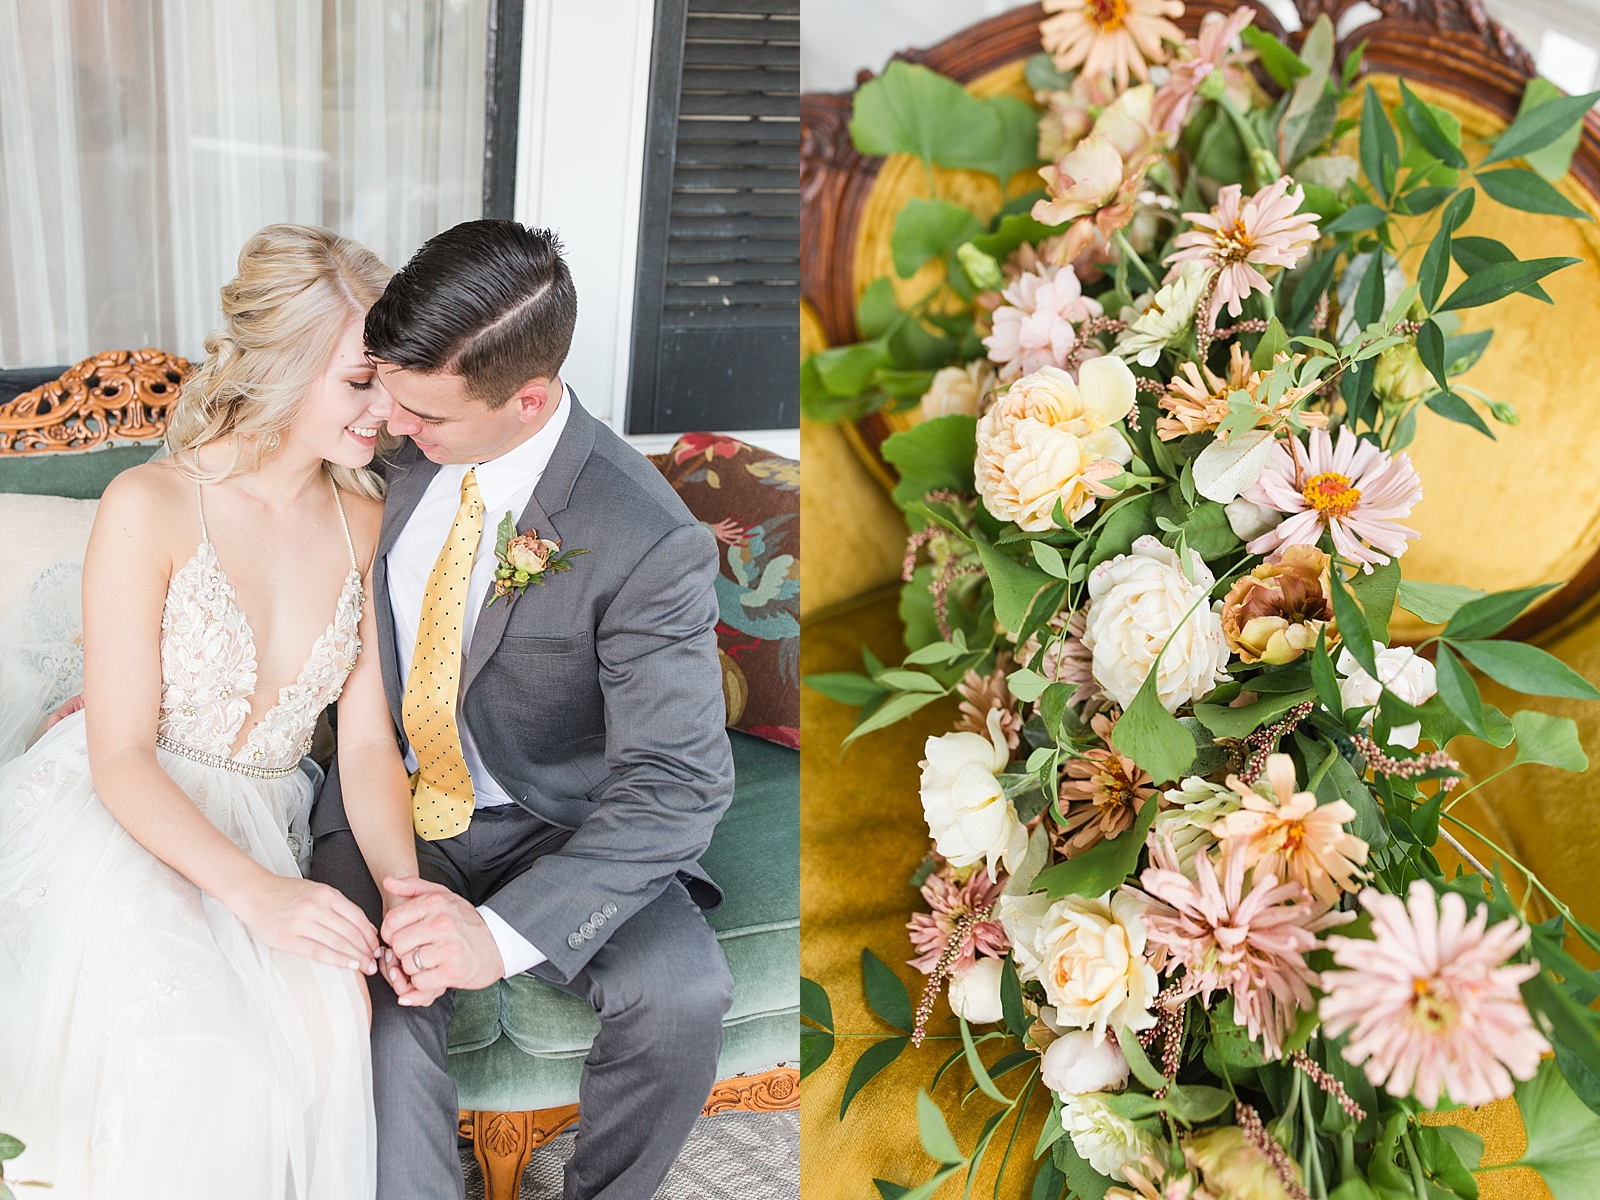 Columbia SC wedding venue bride and groom nuzzling together on vintage couch and bouquet on yellow chair photos